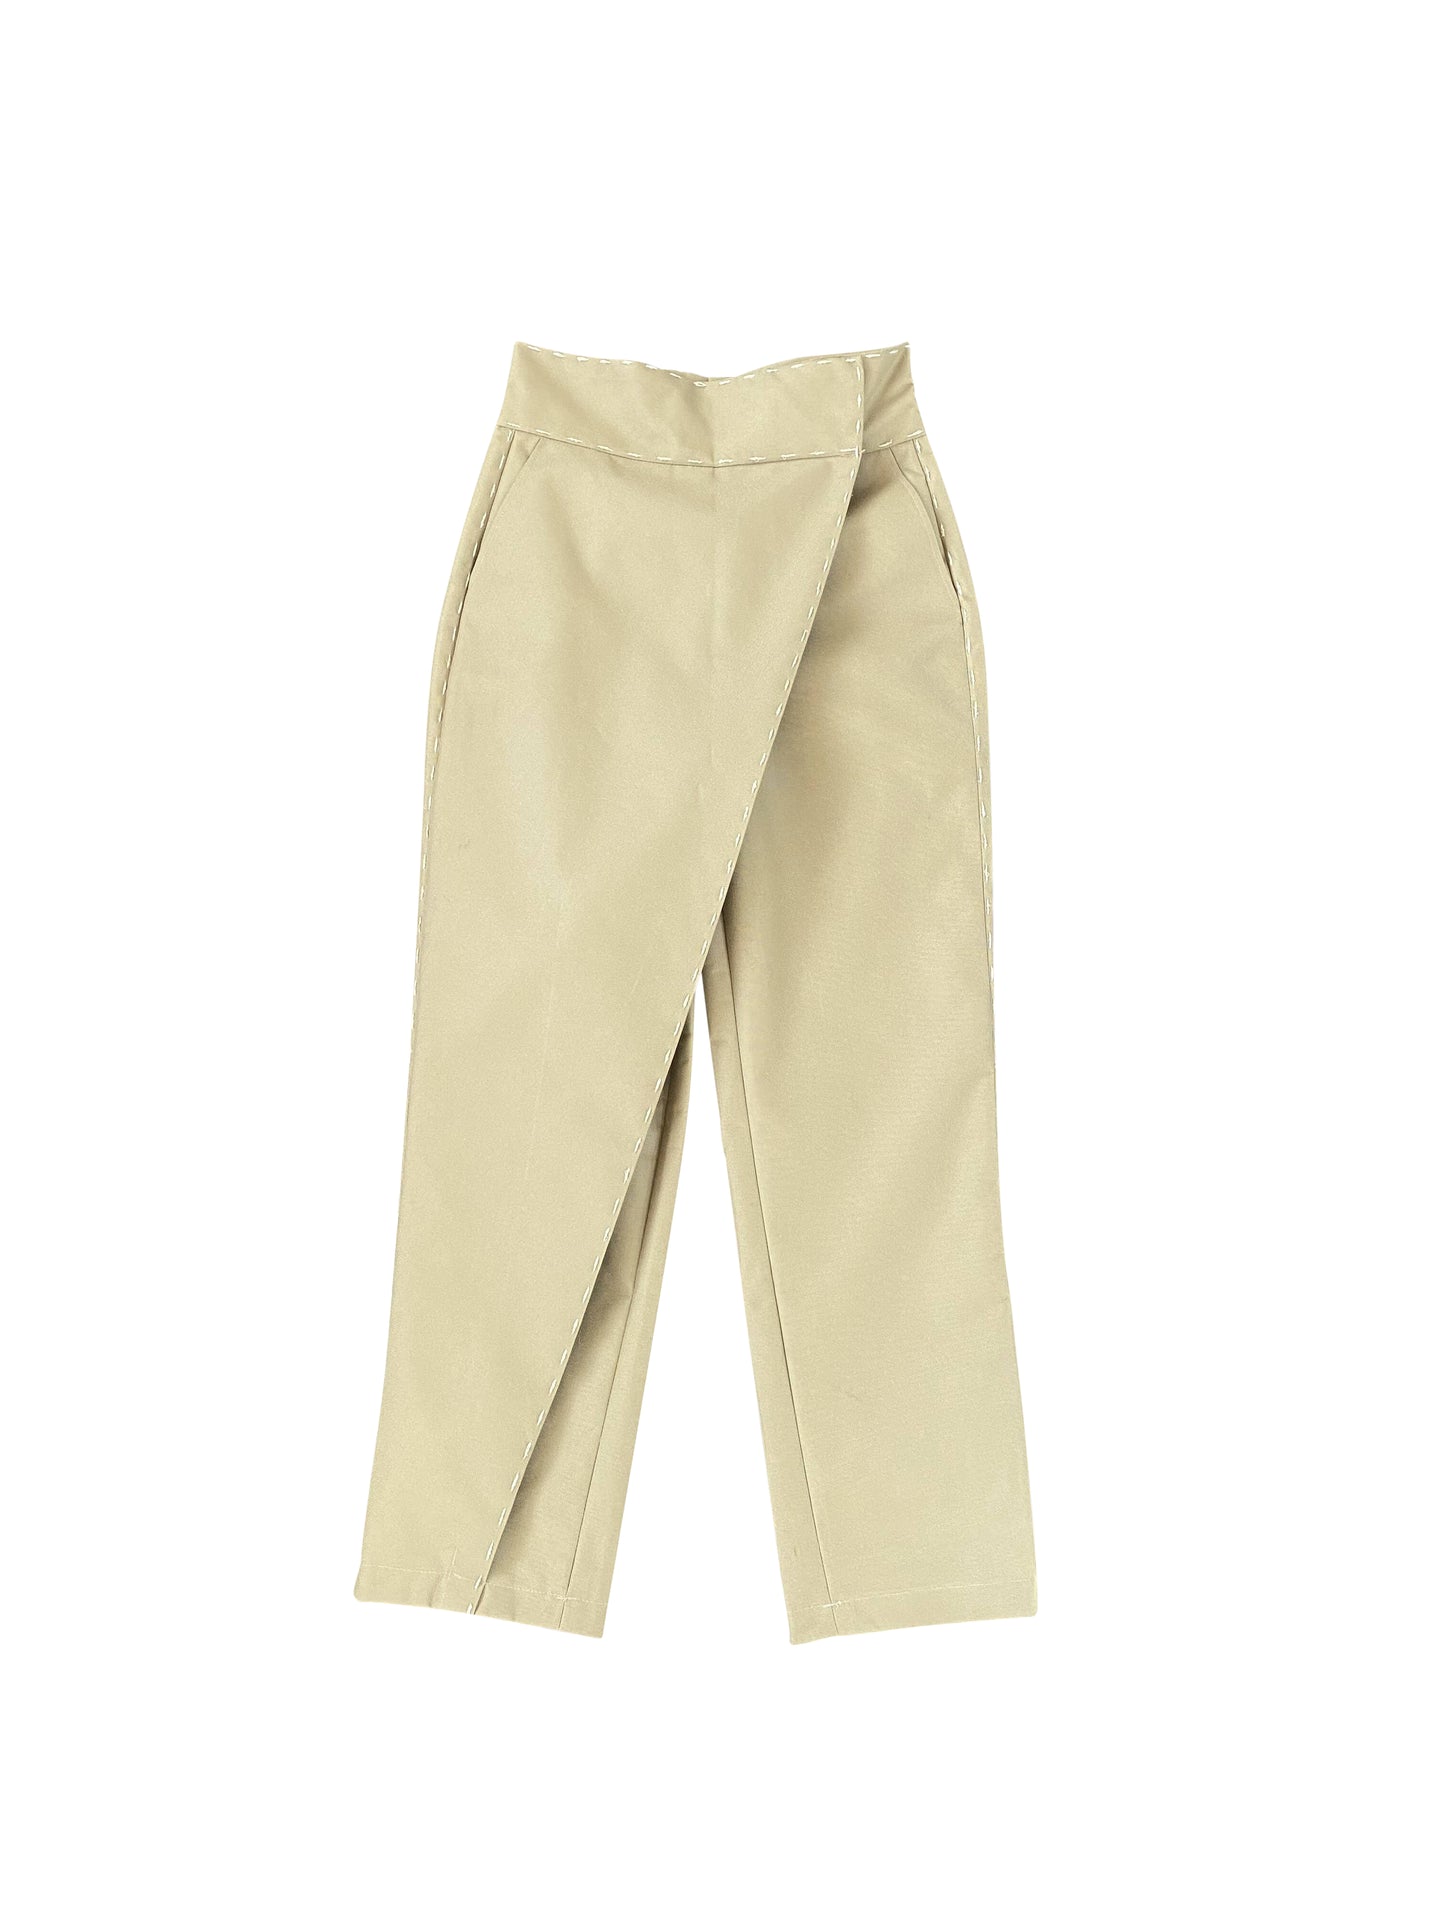 'Totem' Canvas Wrap Pants With Hand Embroidery Stitches